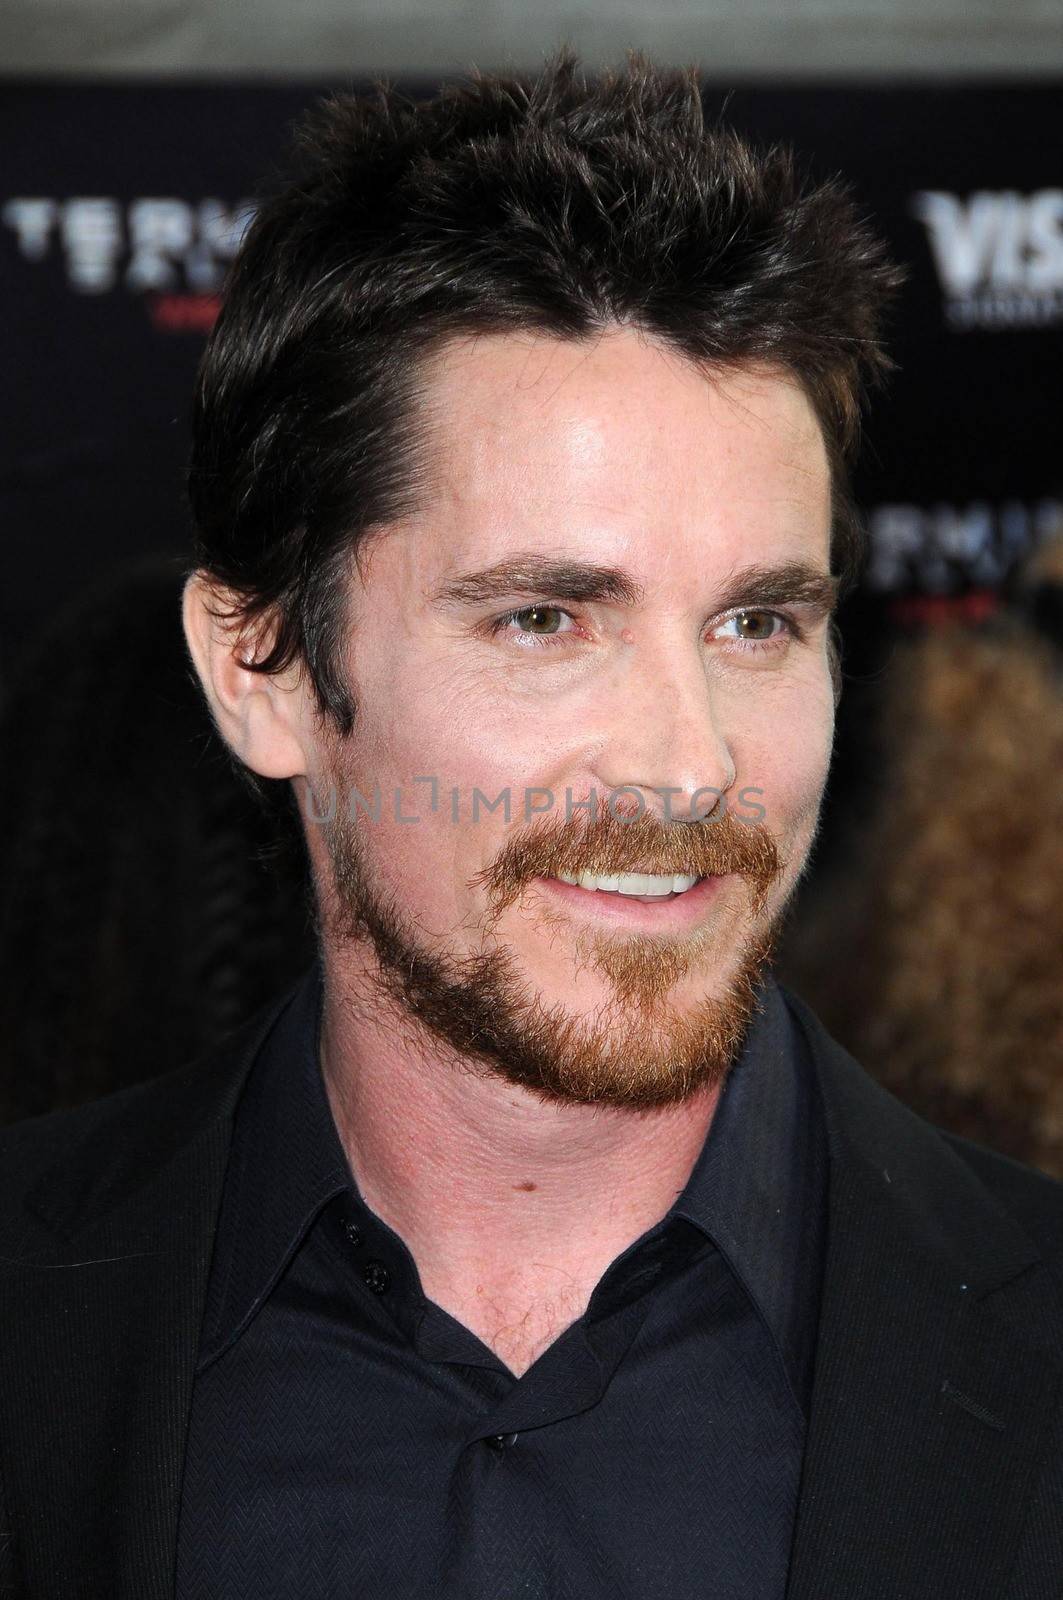 Christian Bale
/ImageCollect by ImageCollect